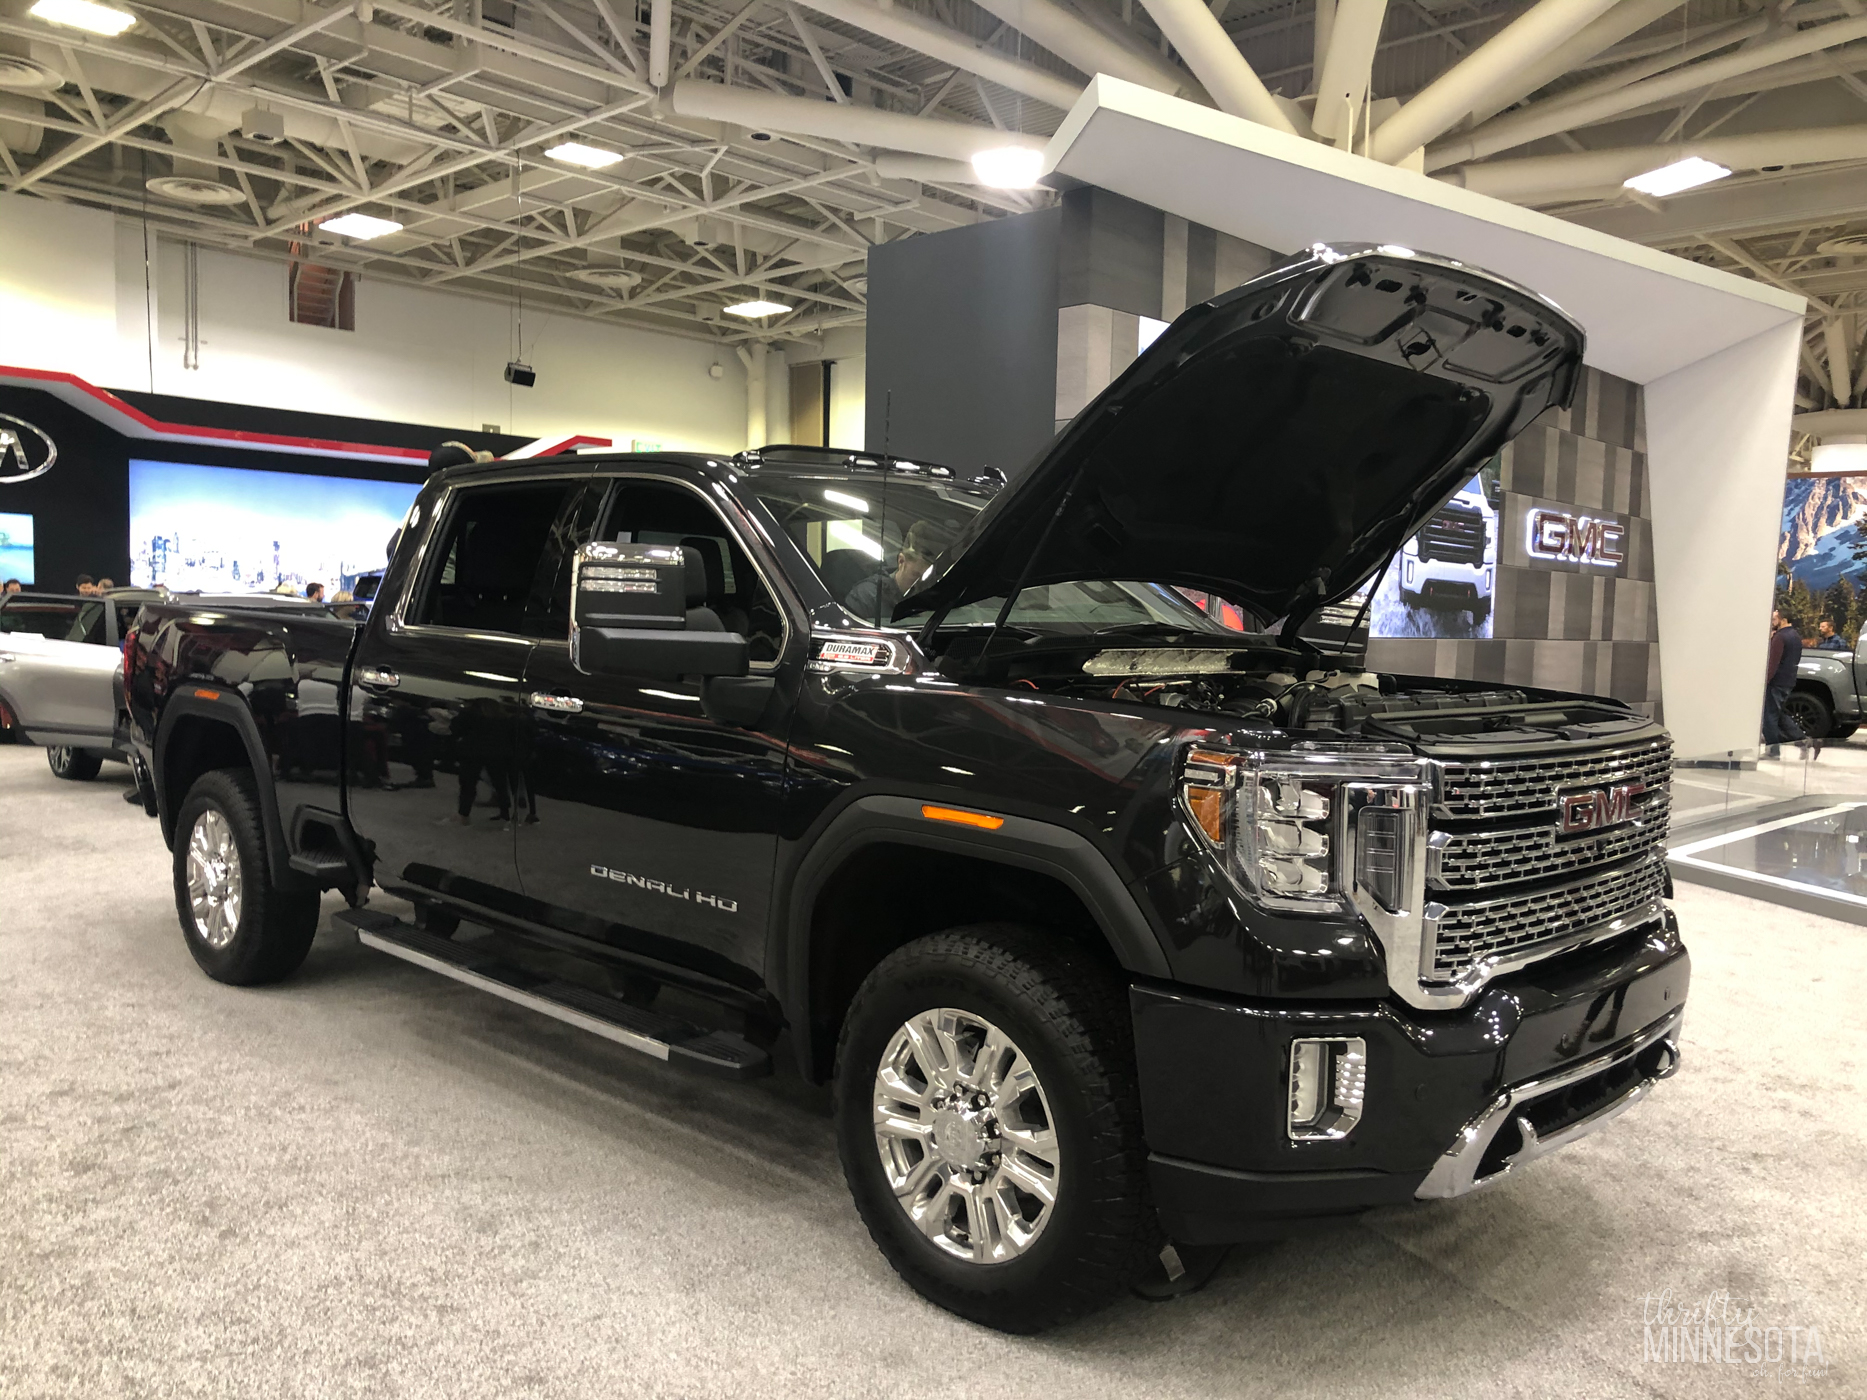 Twin Cities Auto Show Truck.